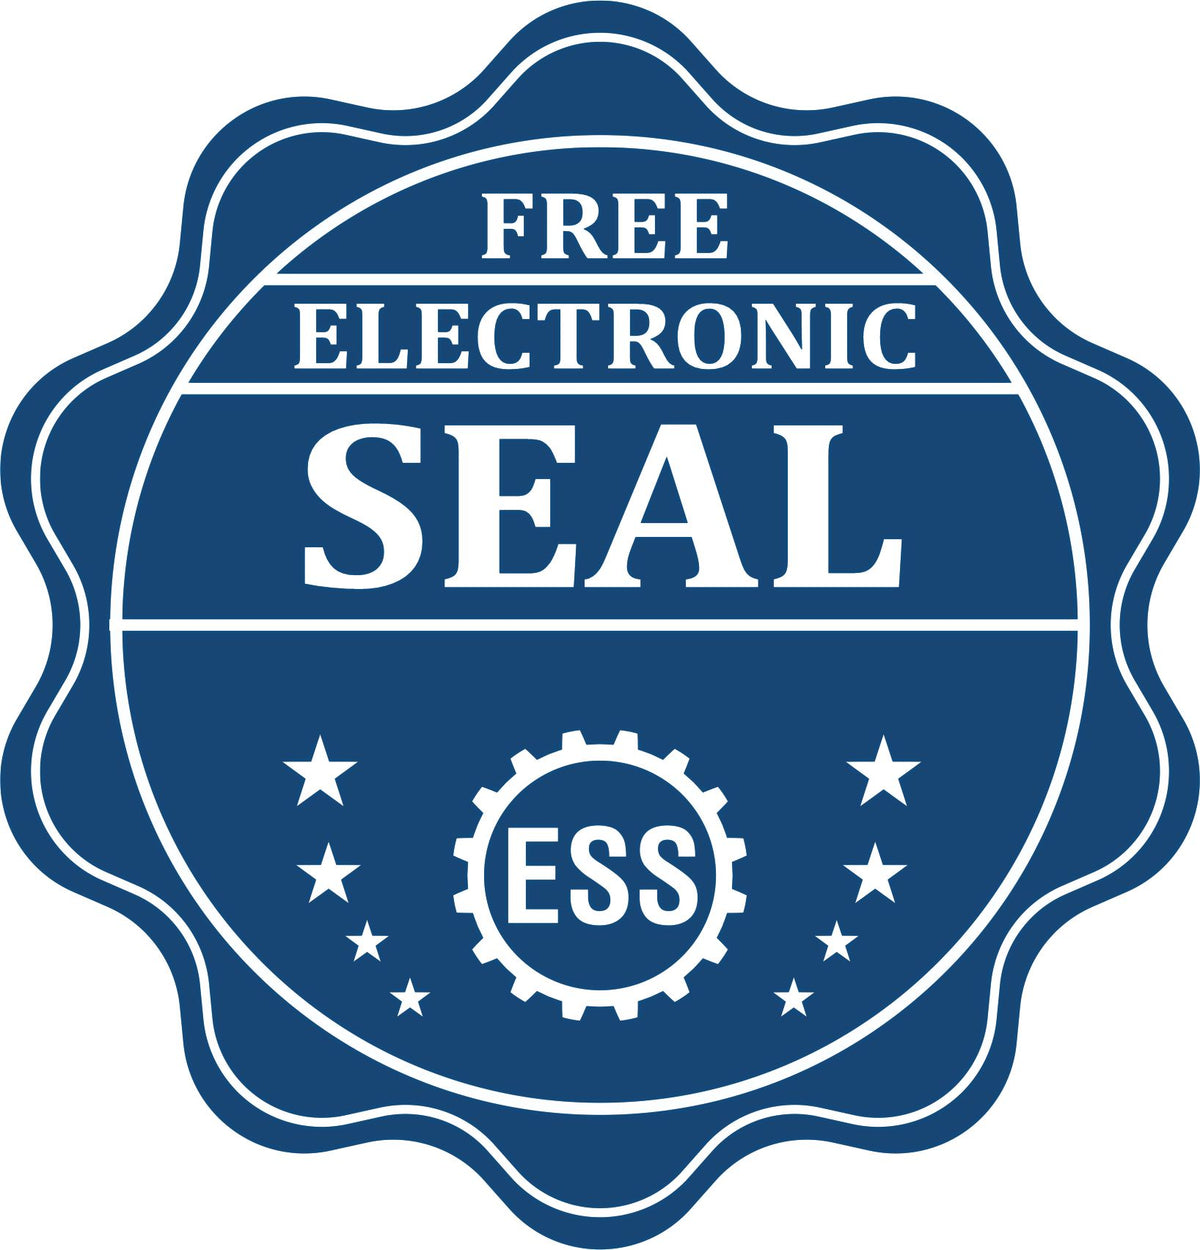 A badge showing a free electronic seal for the Slim Pre-Inked Delaware Land Surveyor Seal Stamp with stars and the ESS gear on the emblem.